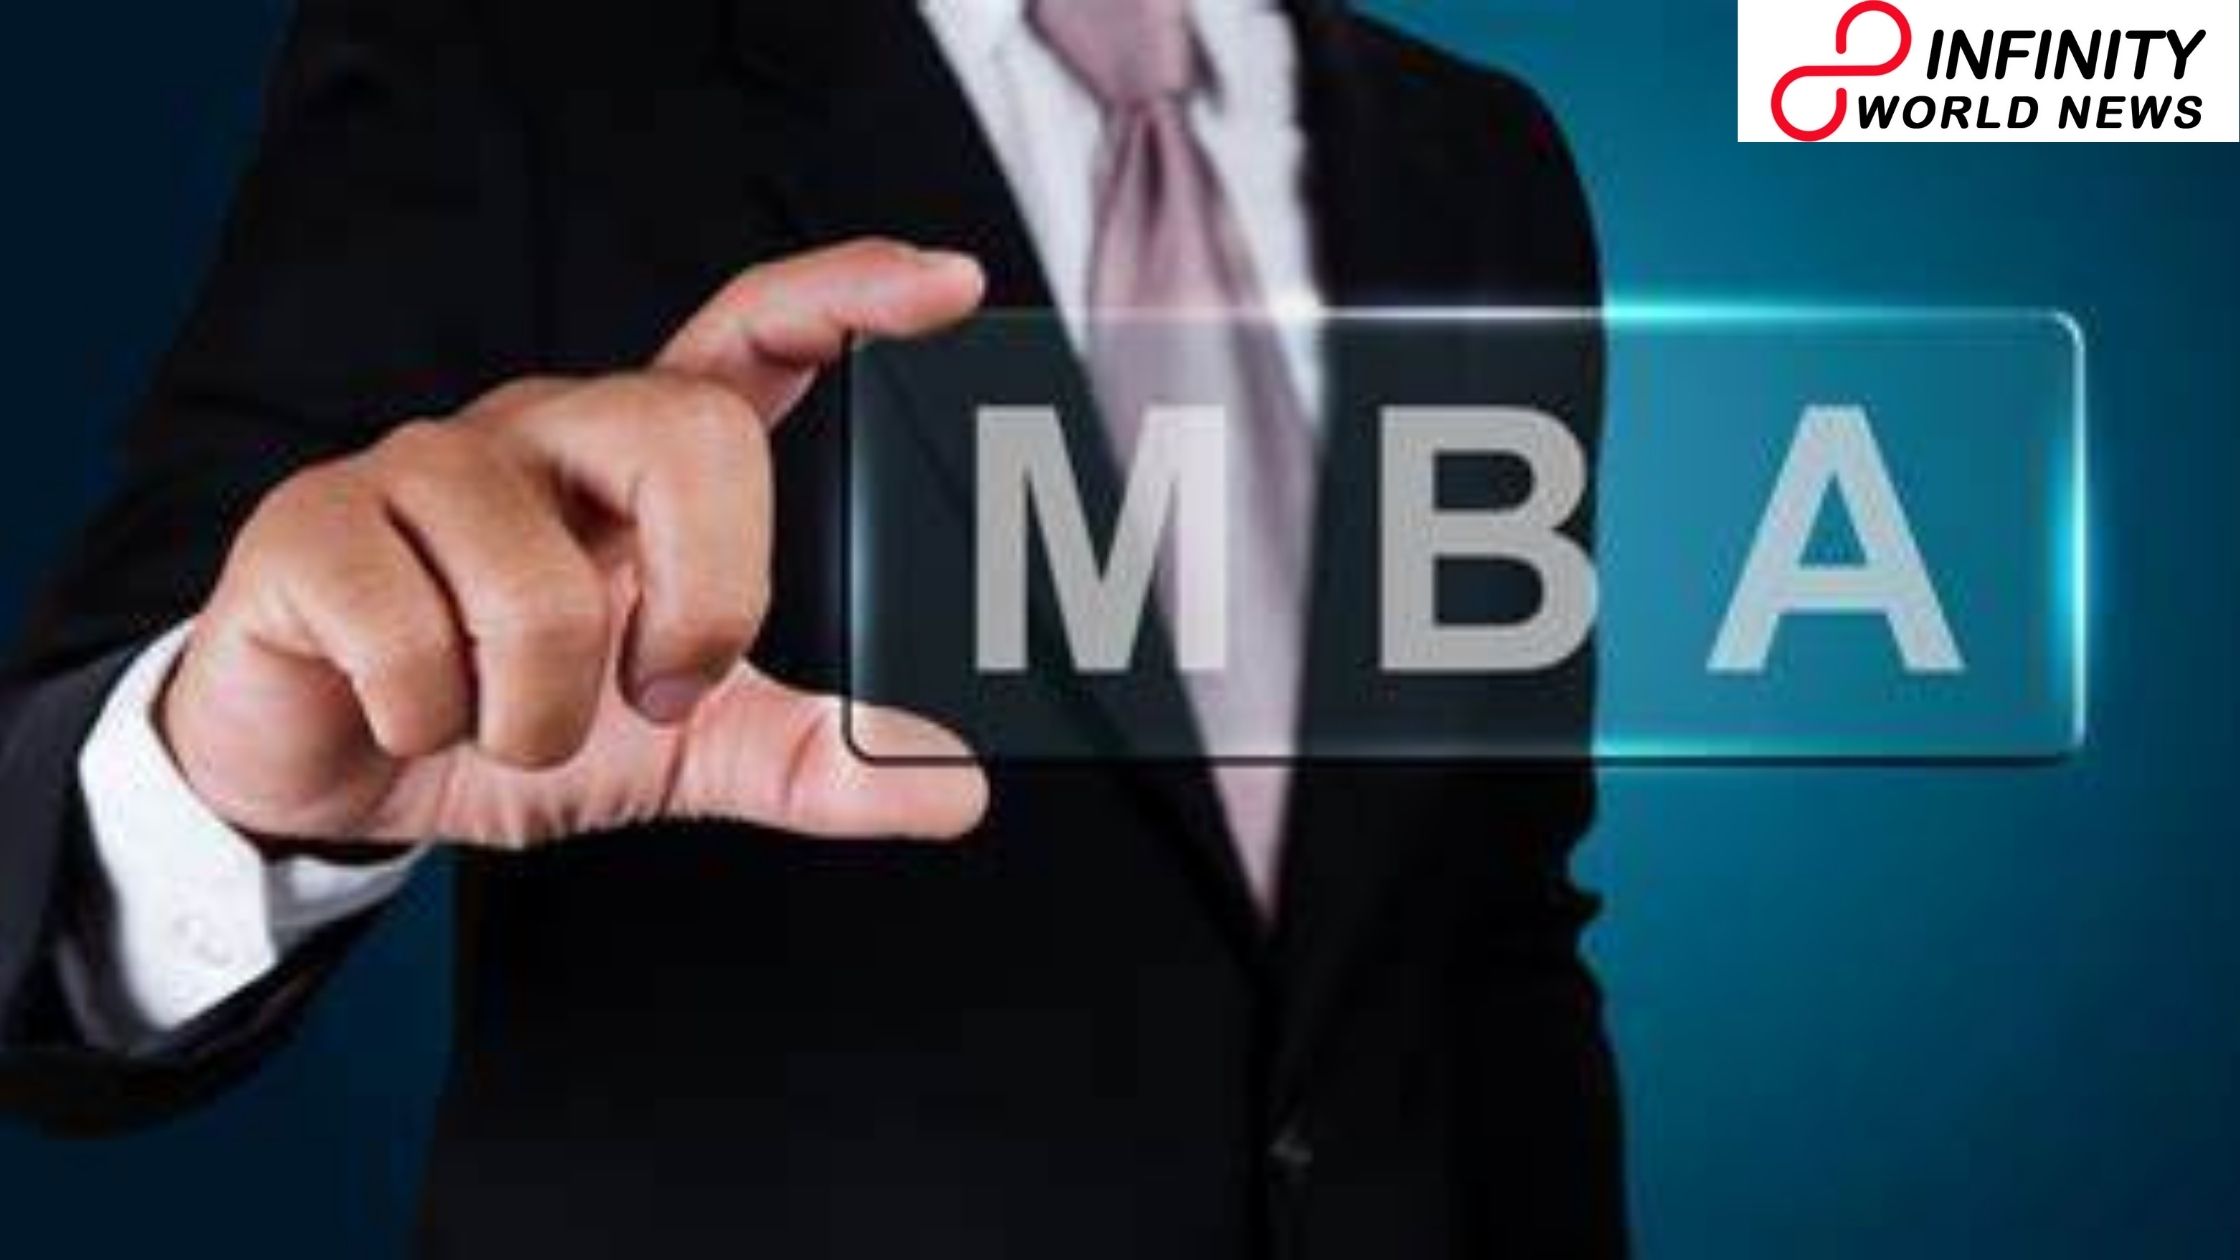 9 MBA specializations to help your profession after Covid-19